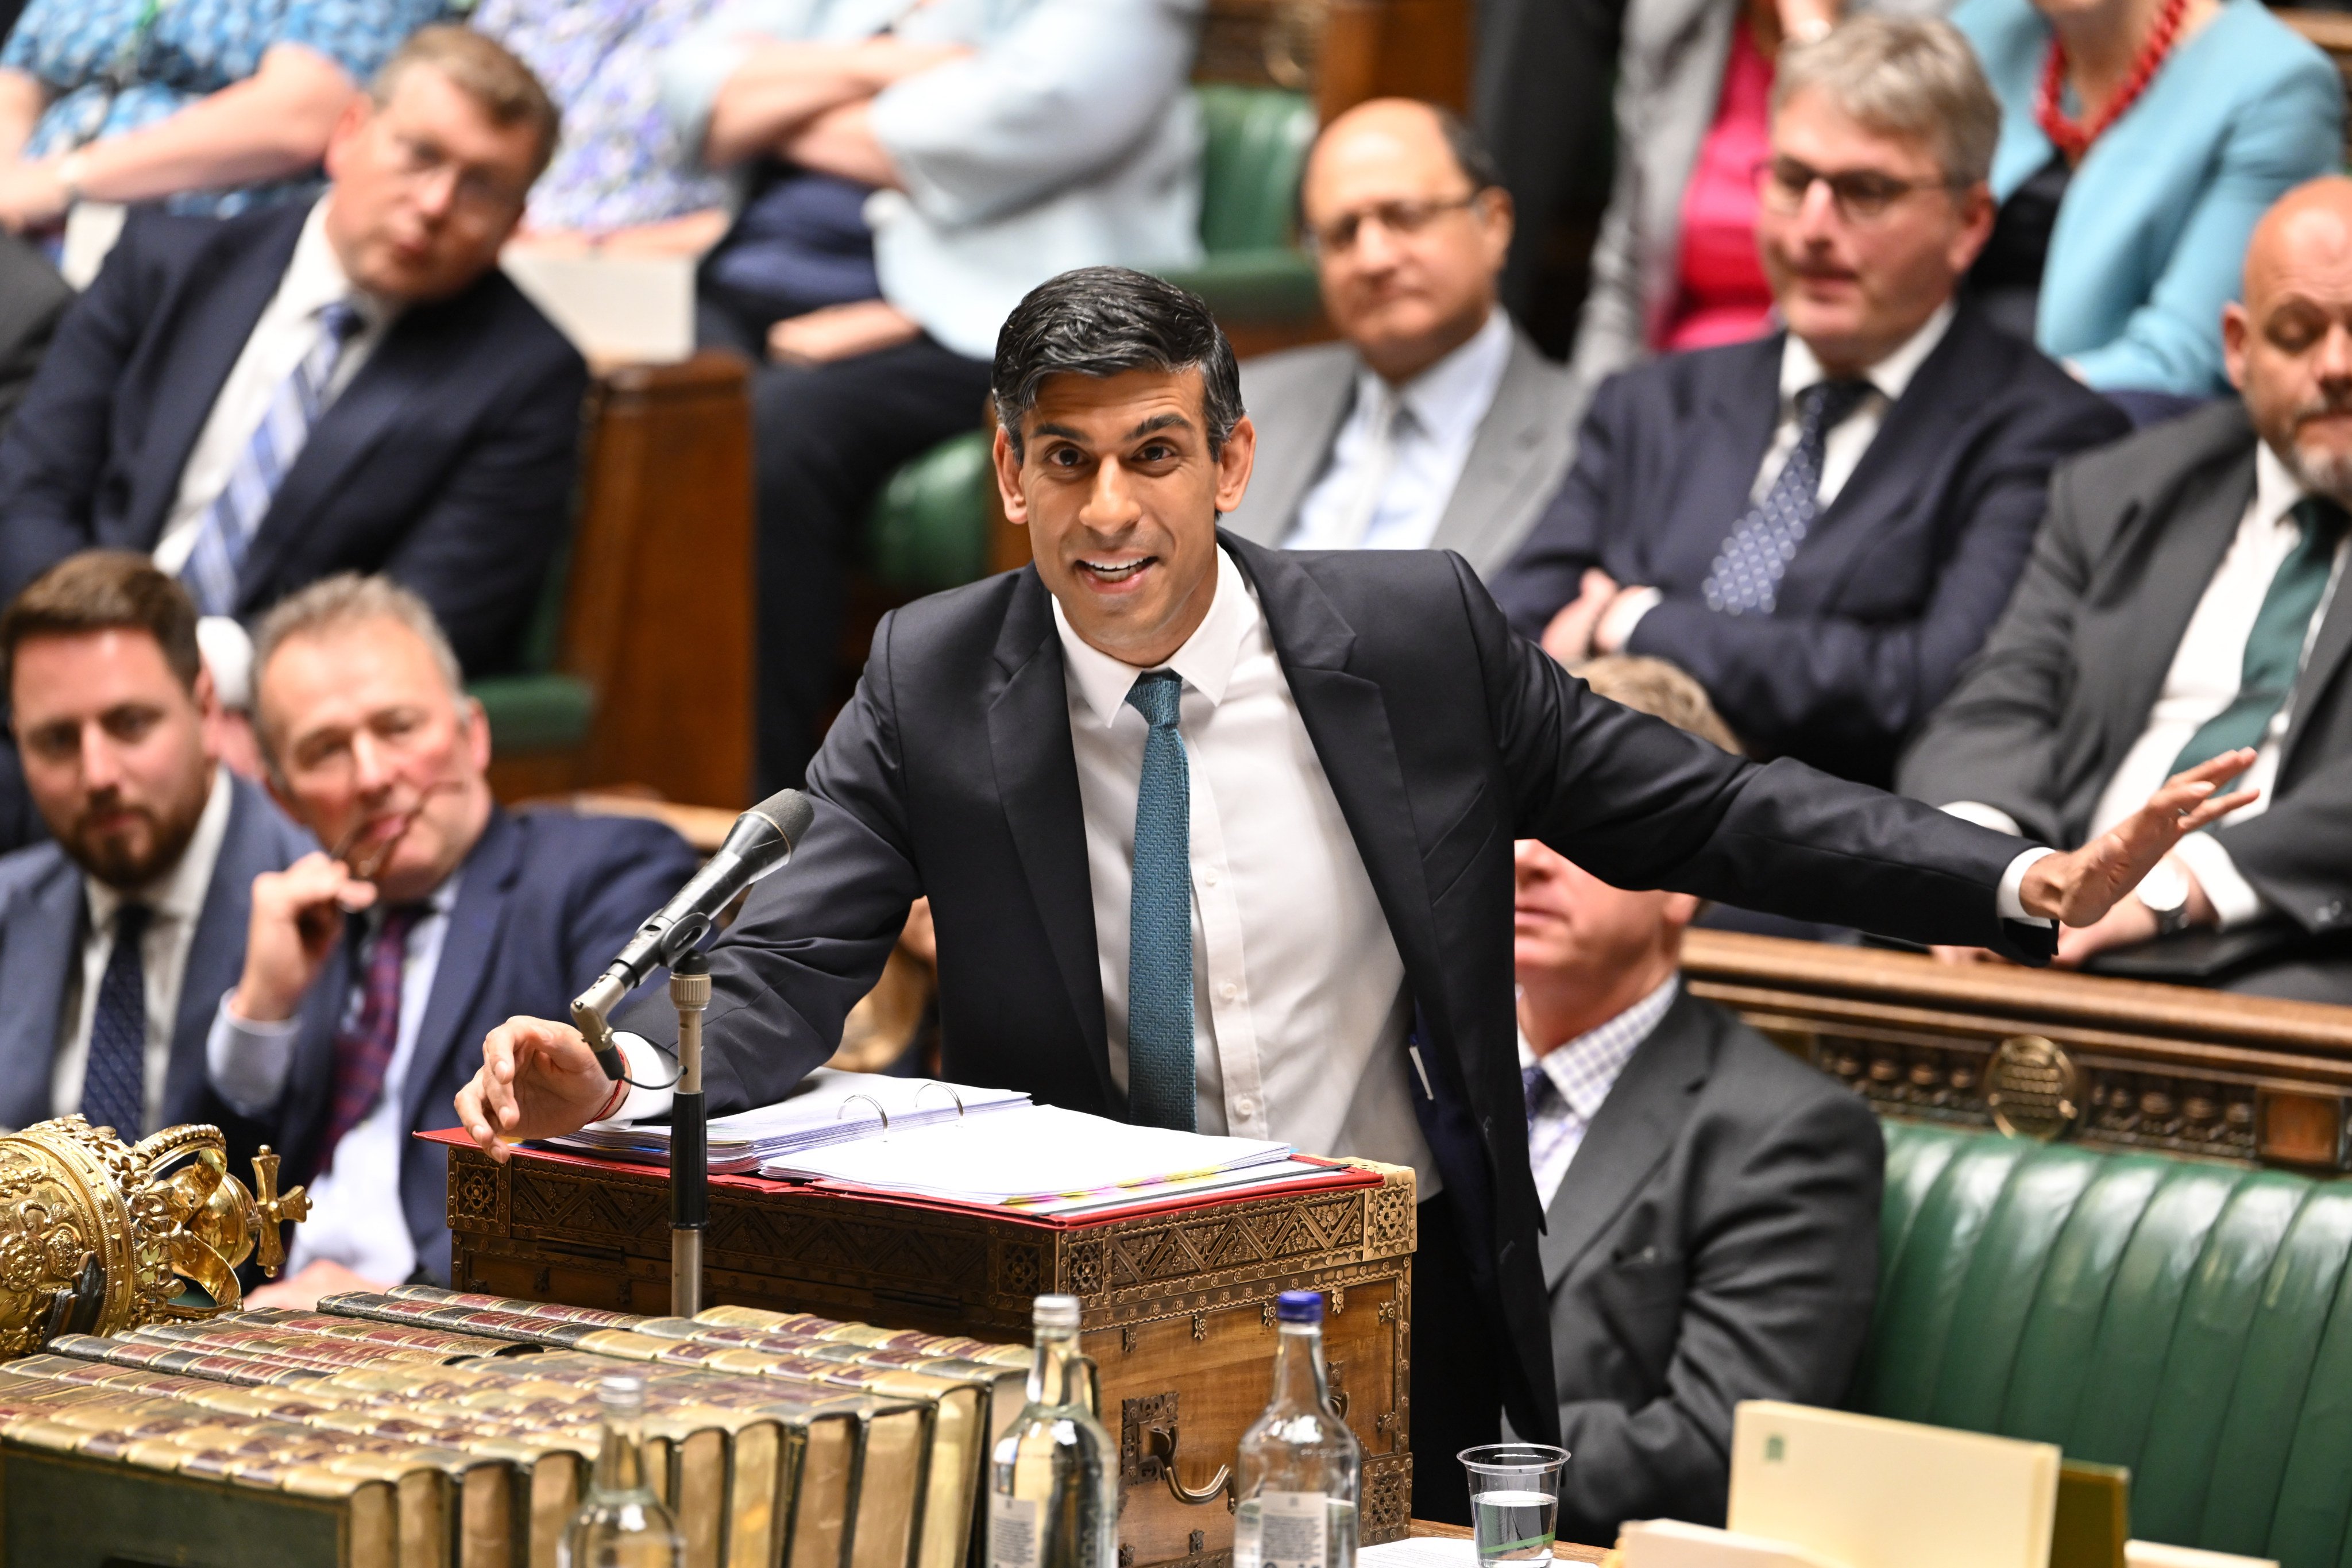 Britain’s Prime Minister Rishi Sunak is facing a setback after a court decision ruling against his plans for asylum seekers. Photo: Jessica Taylor via PA and dpa